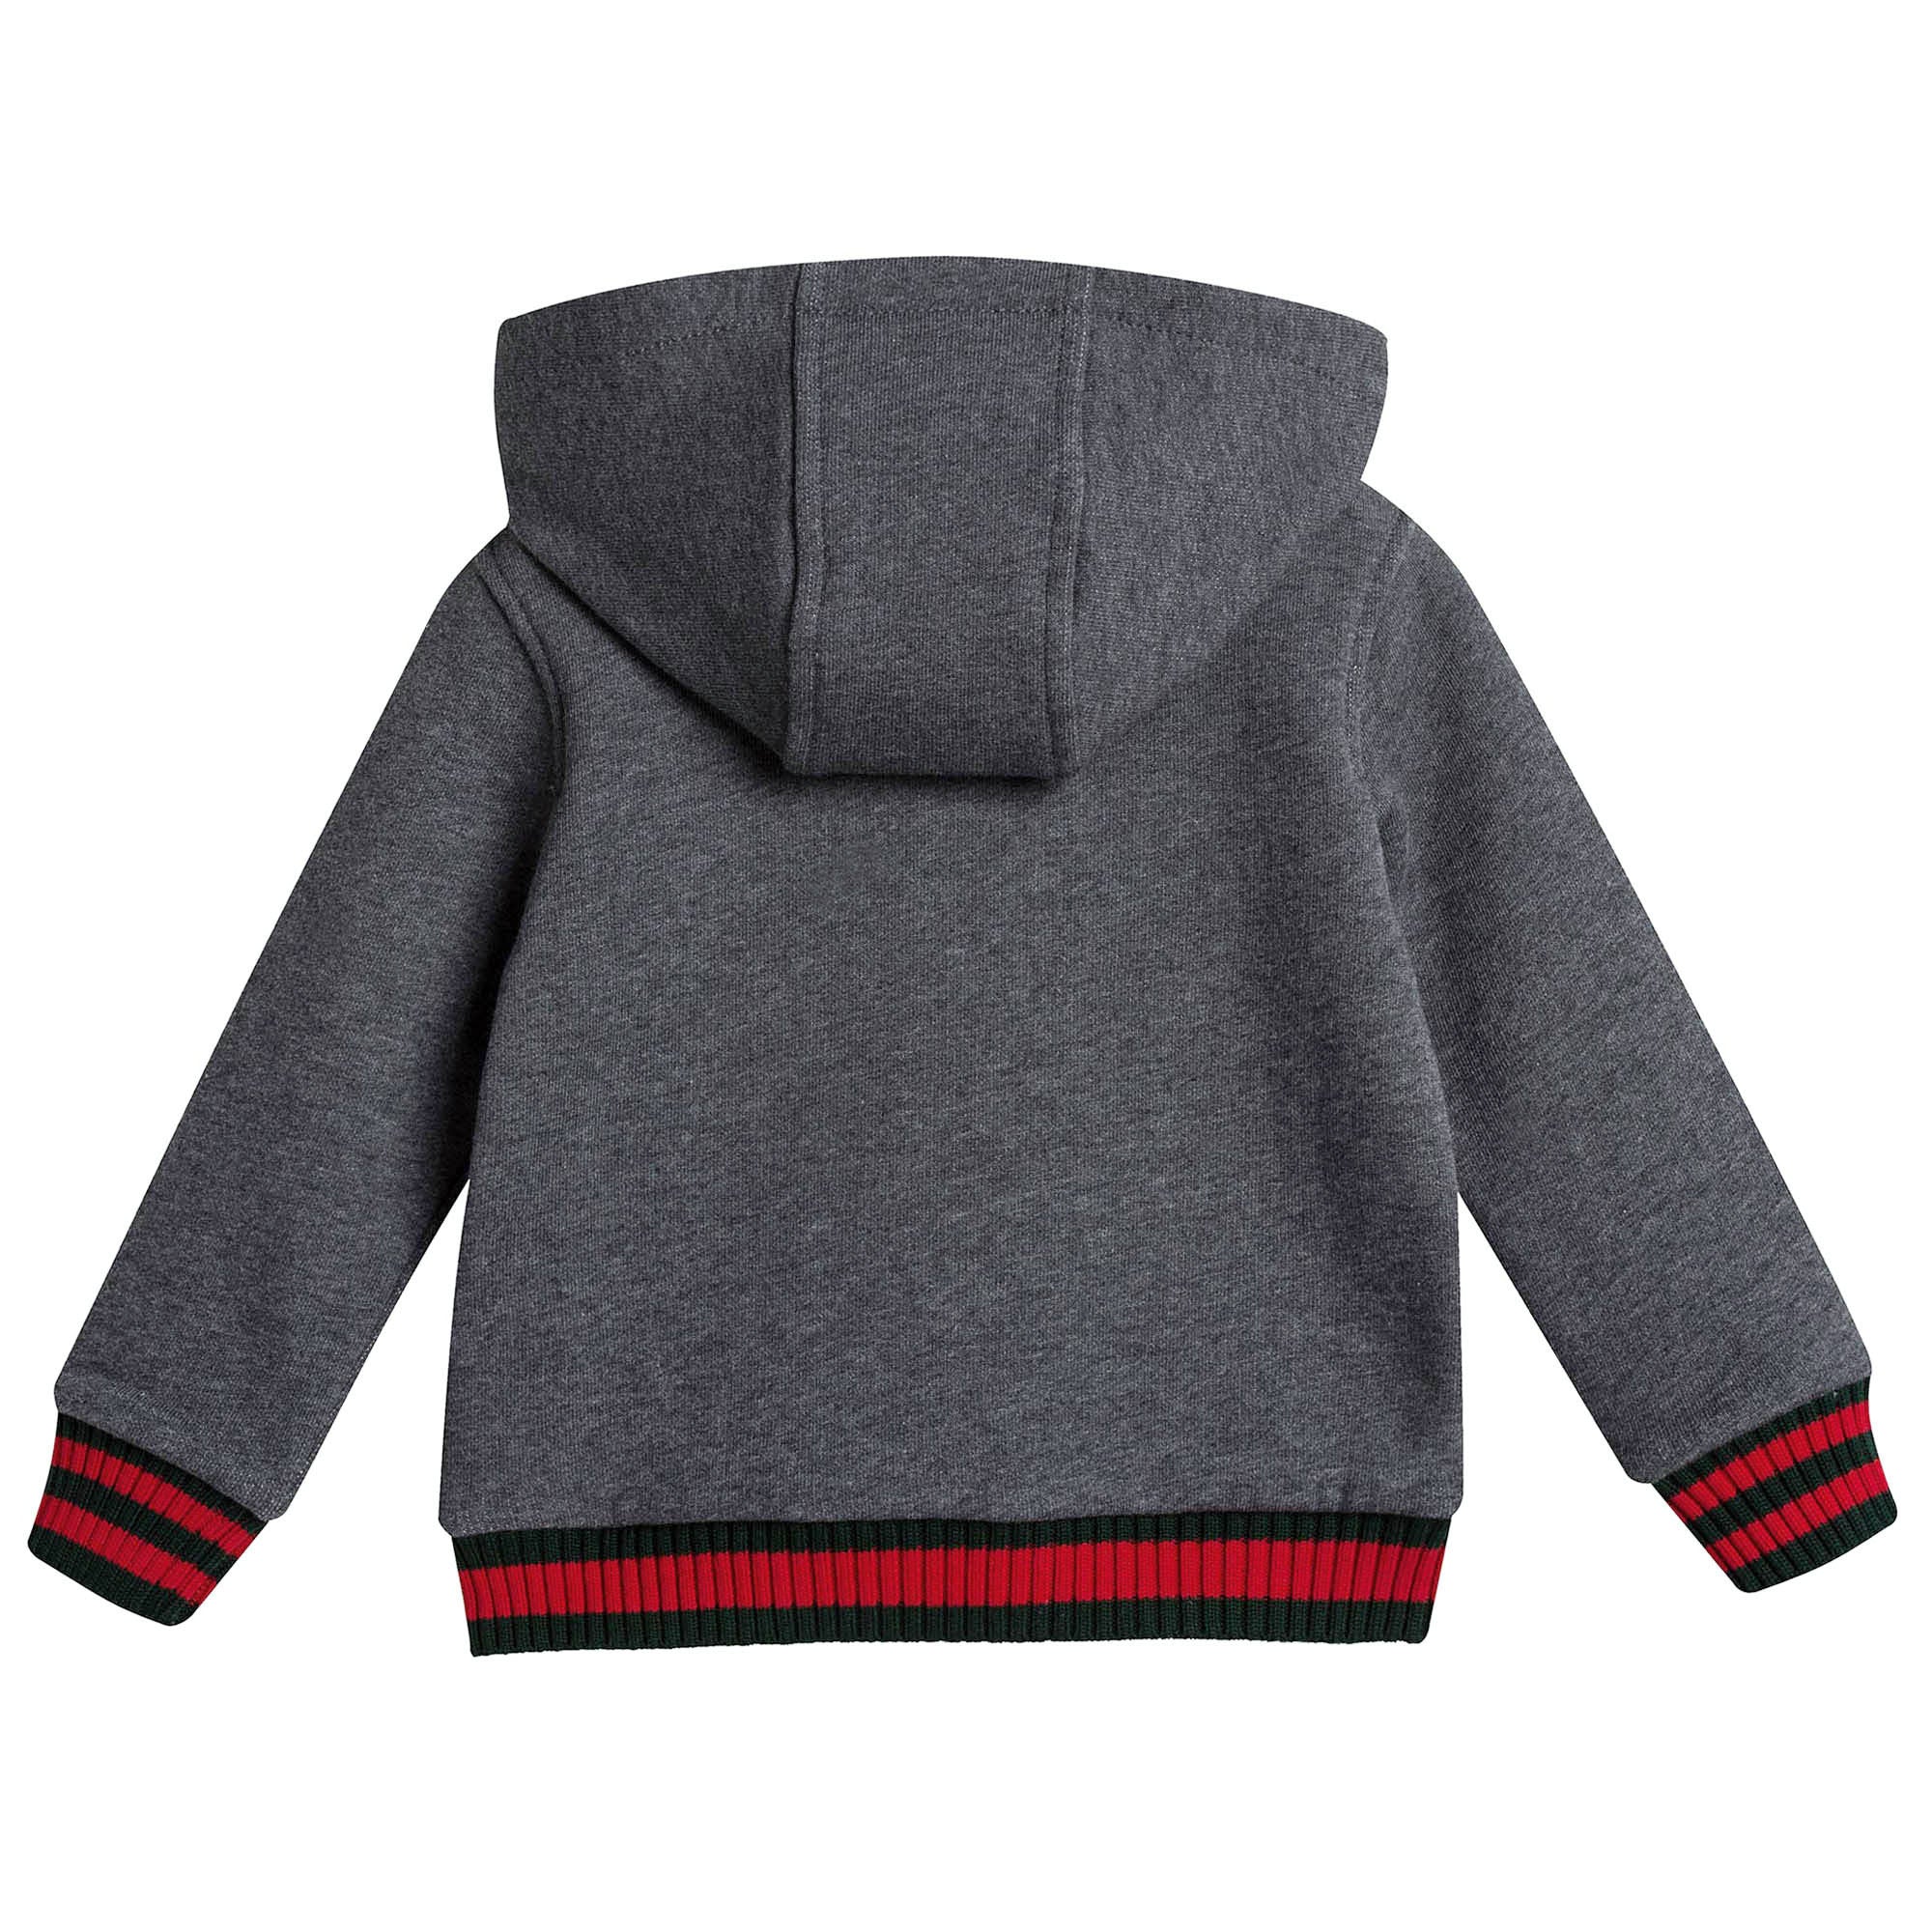 Baby Boys Grey Hooded Ribbed Cuffs Cotton Zip-Up Top - CÉMAROSE | Children's Fashion Store - 2